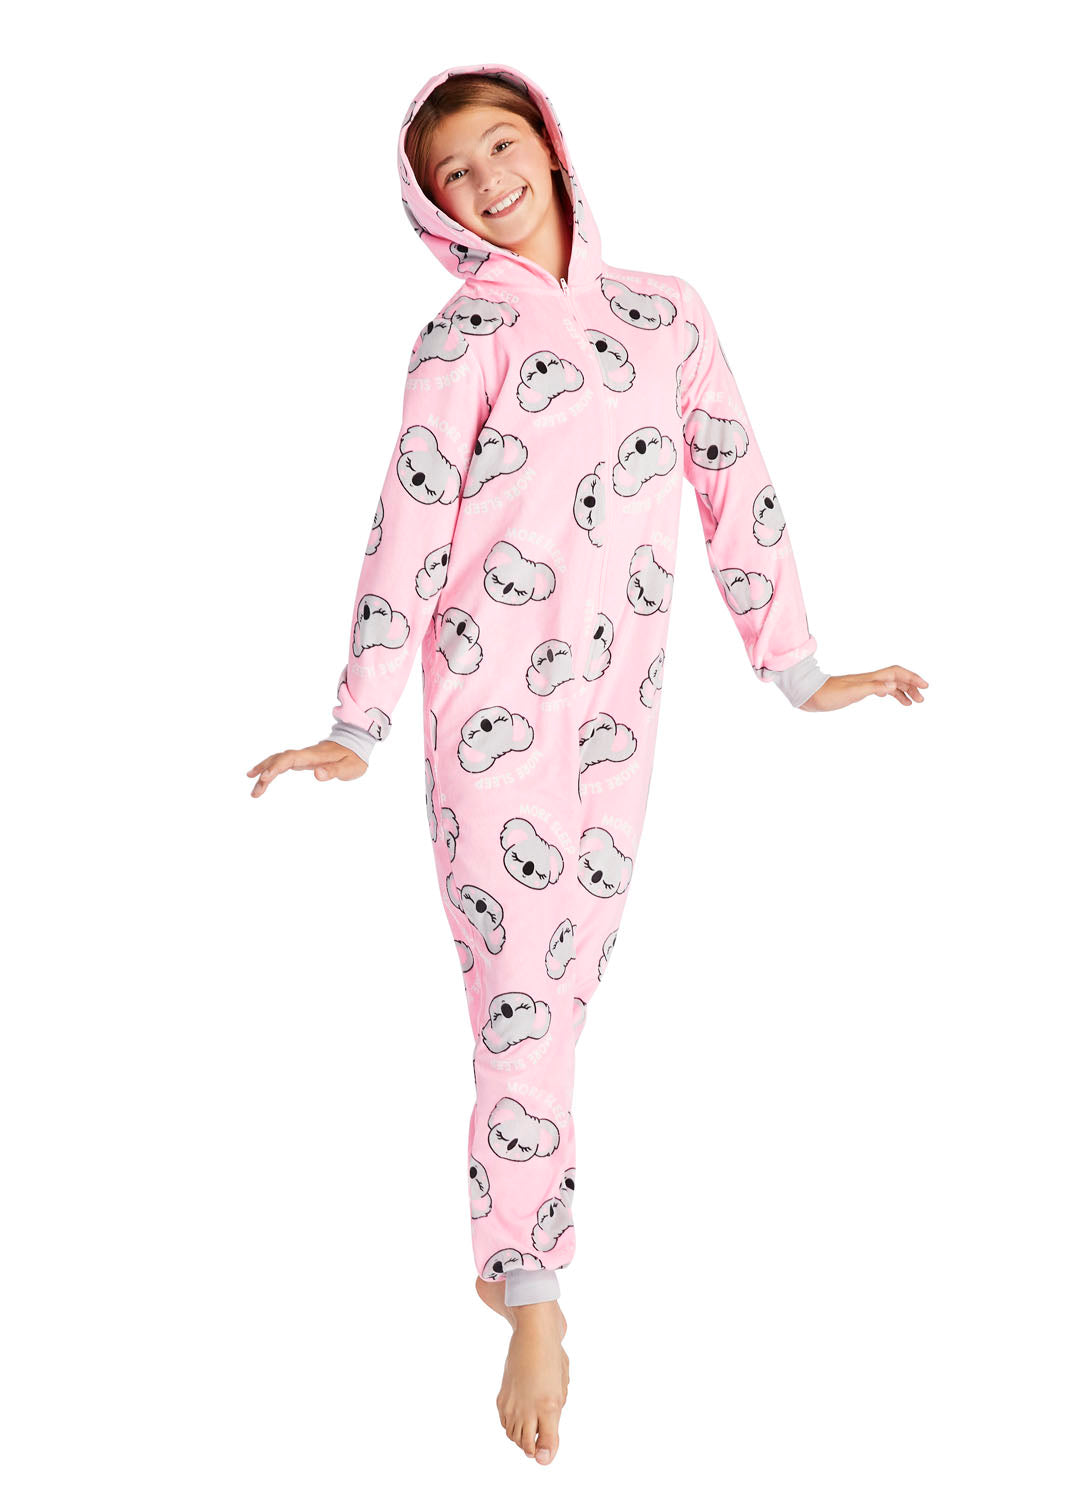 Teen girl jumping and wearing a Koala Print Onesie in Pink colour